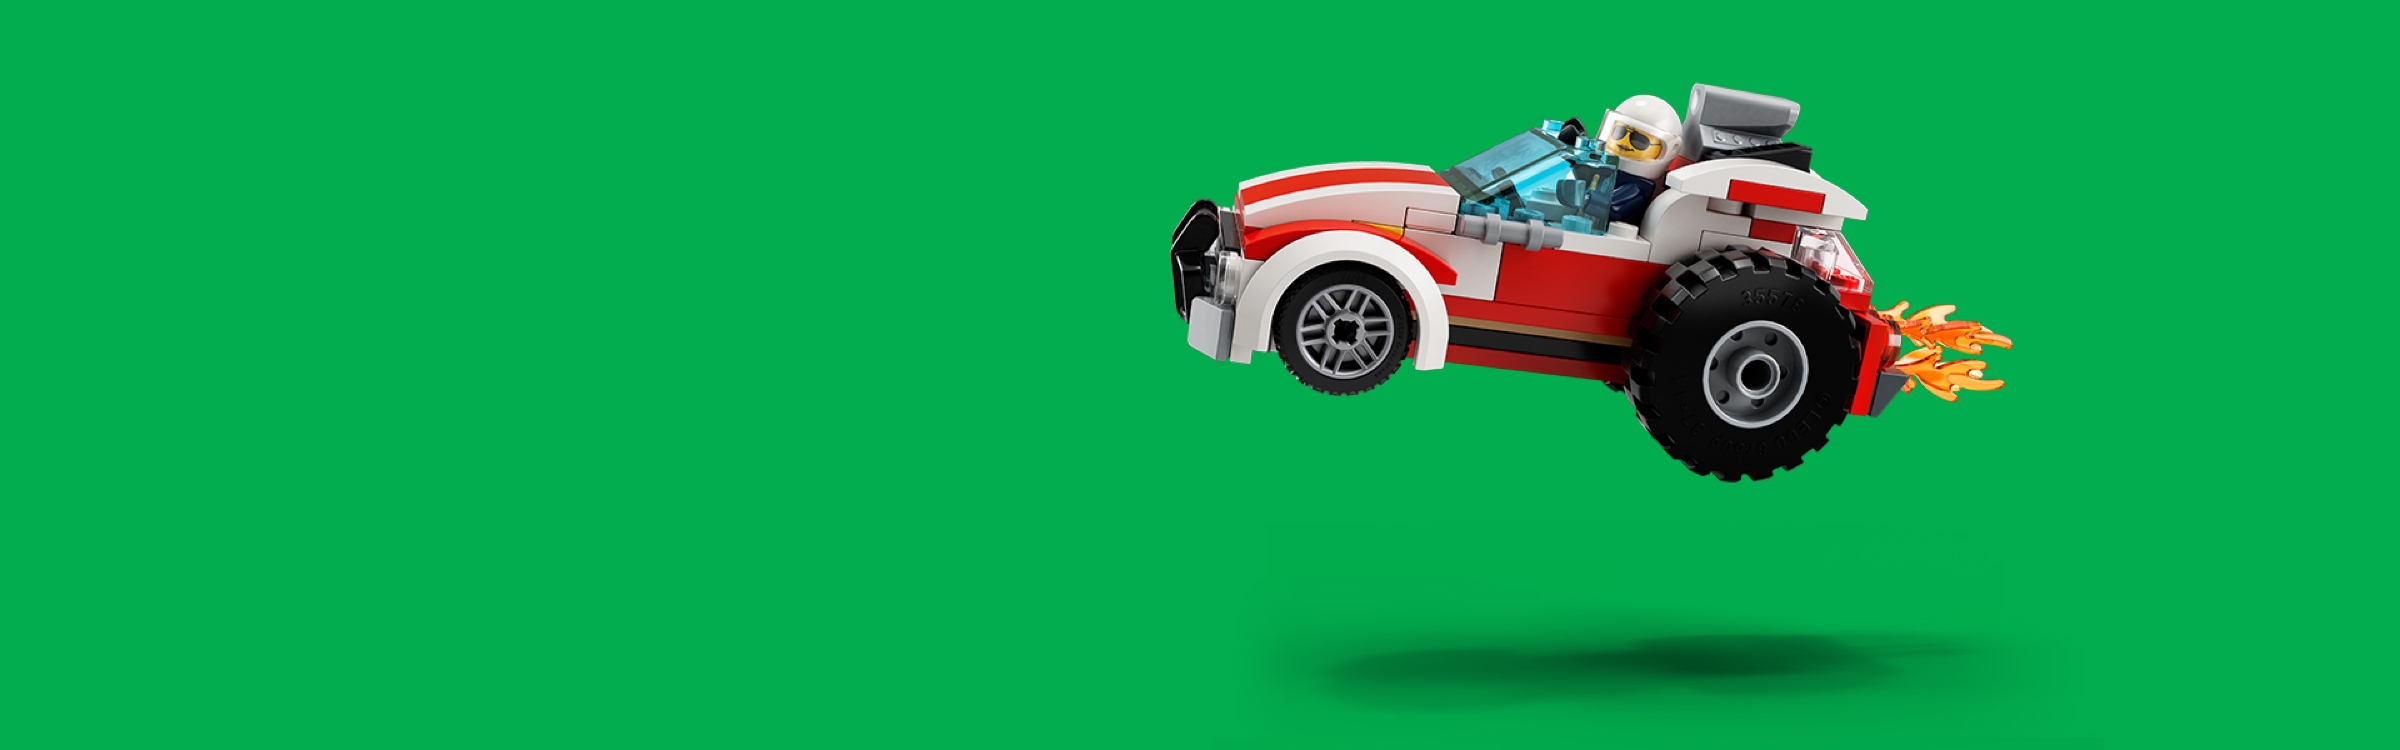 Toy Vehicles & Sets | Official LEGO® Shop GB